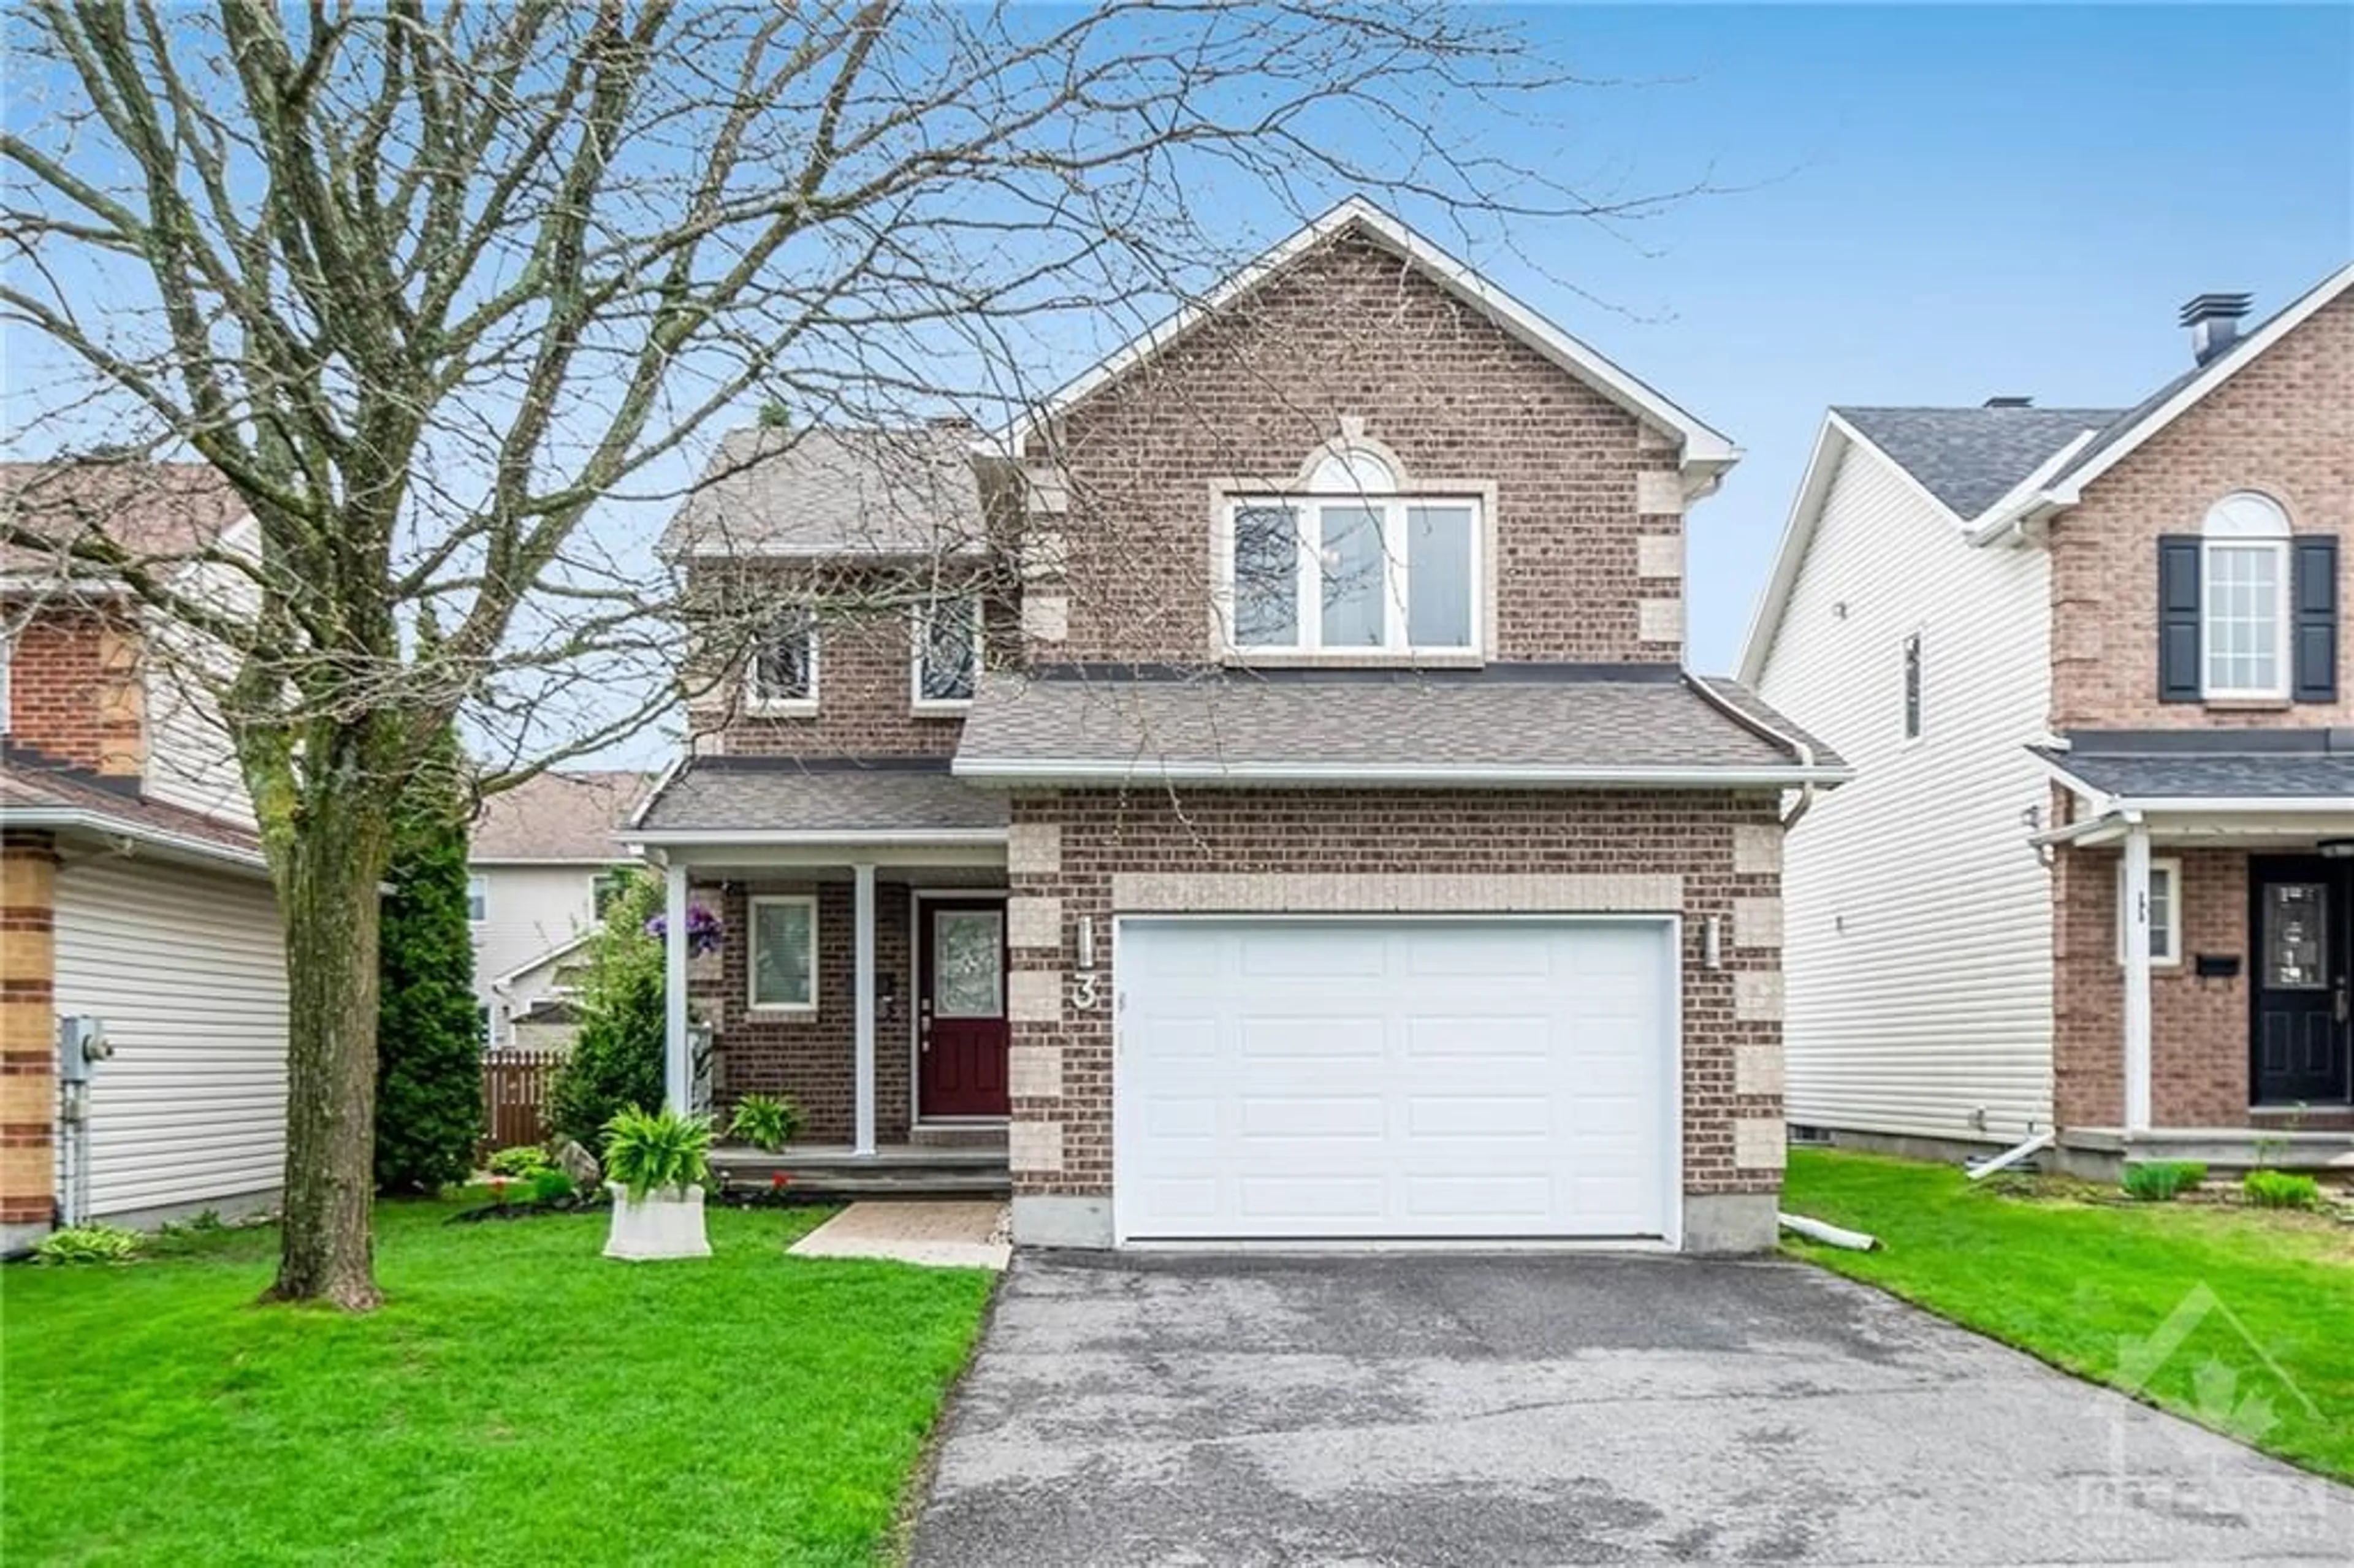 Frontside or backside of a home for 3 WHALINGS Cir, Stittsville Ontario K2S 1S4